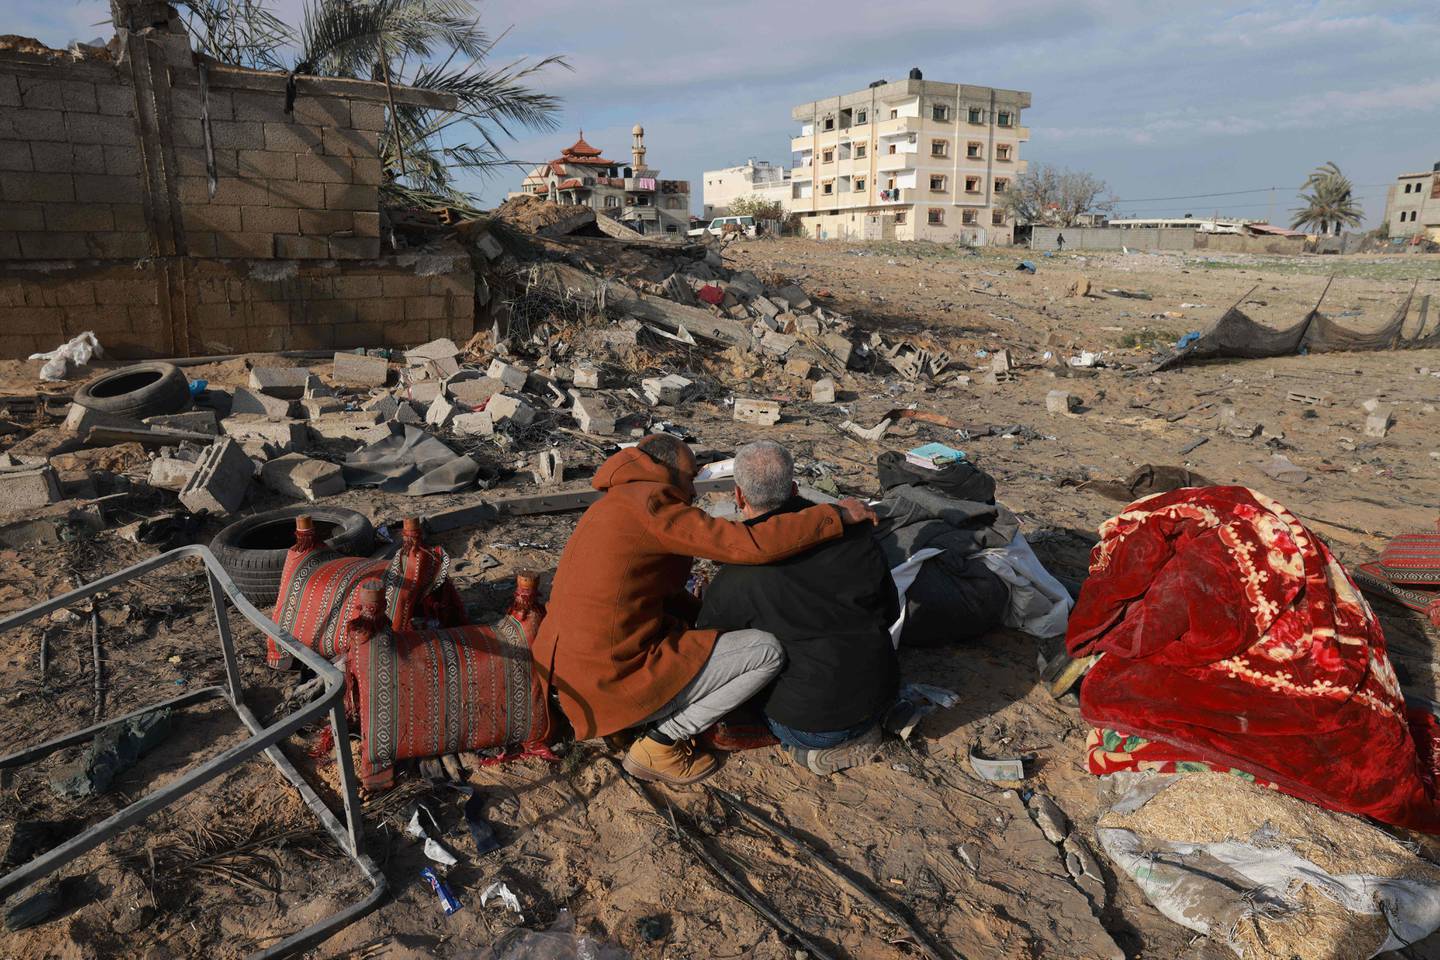 A Palestinian man comforts another as they inspect the destruction in Rafah on February 18, 2024, following overnight Israeli air strikes on the southern Gaza Strip border city amid ongoing battles between Israel and the Palestinian Hamas movement. Prospects for an Israel-Hamas ceasefire dimmed on February 18 after the United States signalled it would veto the latest push for a UN Security Council resolution and mediator Qatar acknowledged that truce talks on the other diplomatic front have hit an impasse. (Photo by MOHAMMED ABED / AFP)